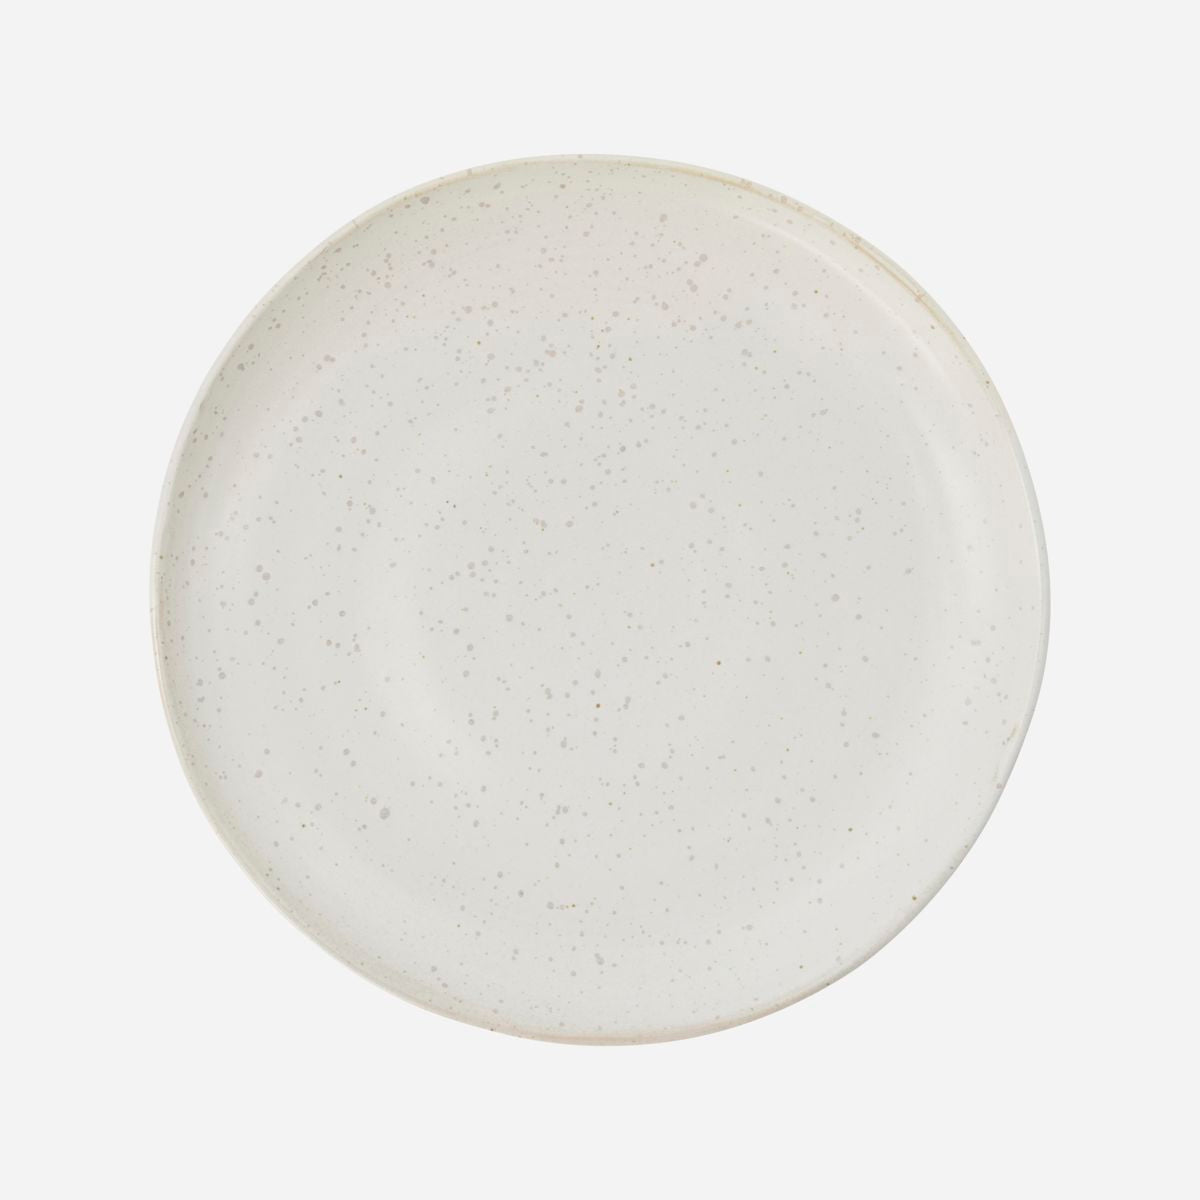 Lunch plate, Pion, Grey/White(Set of 6)